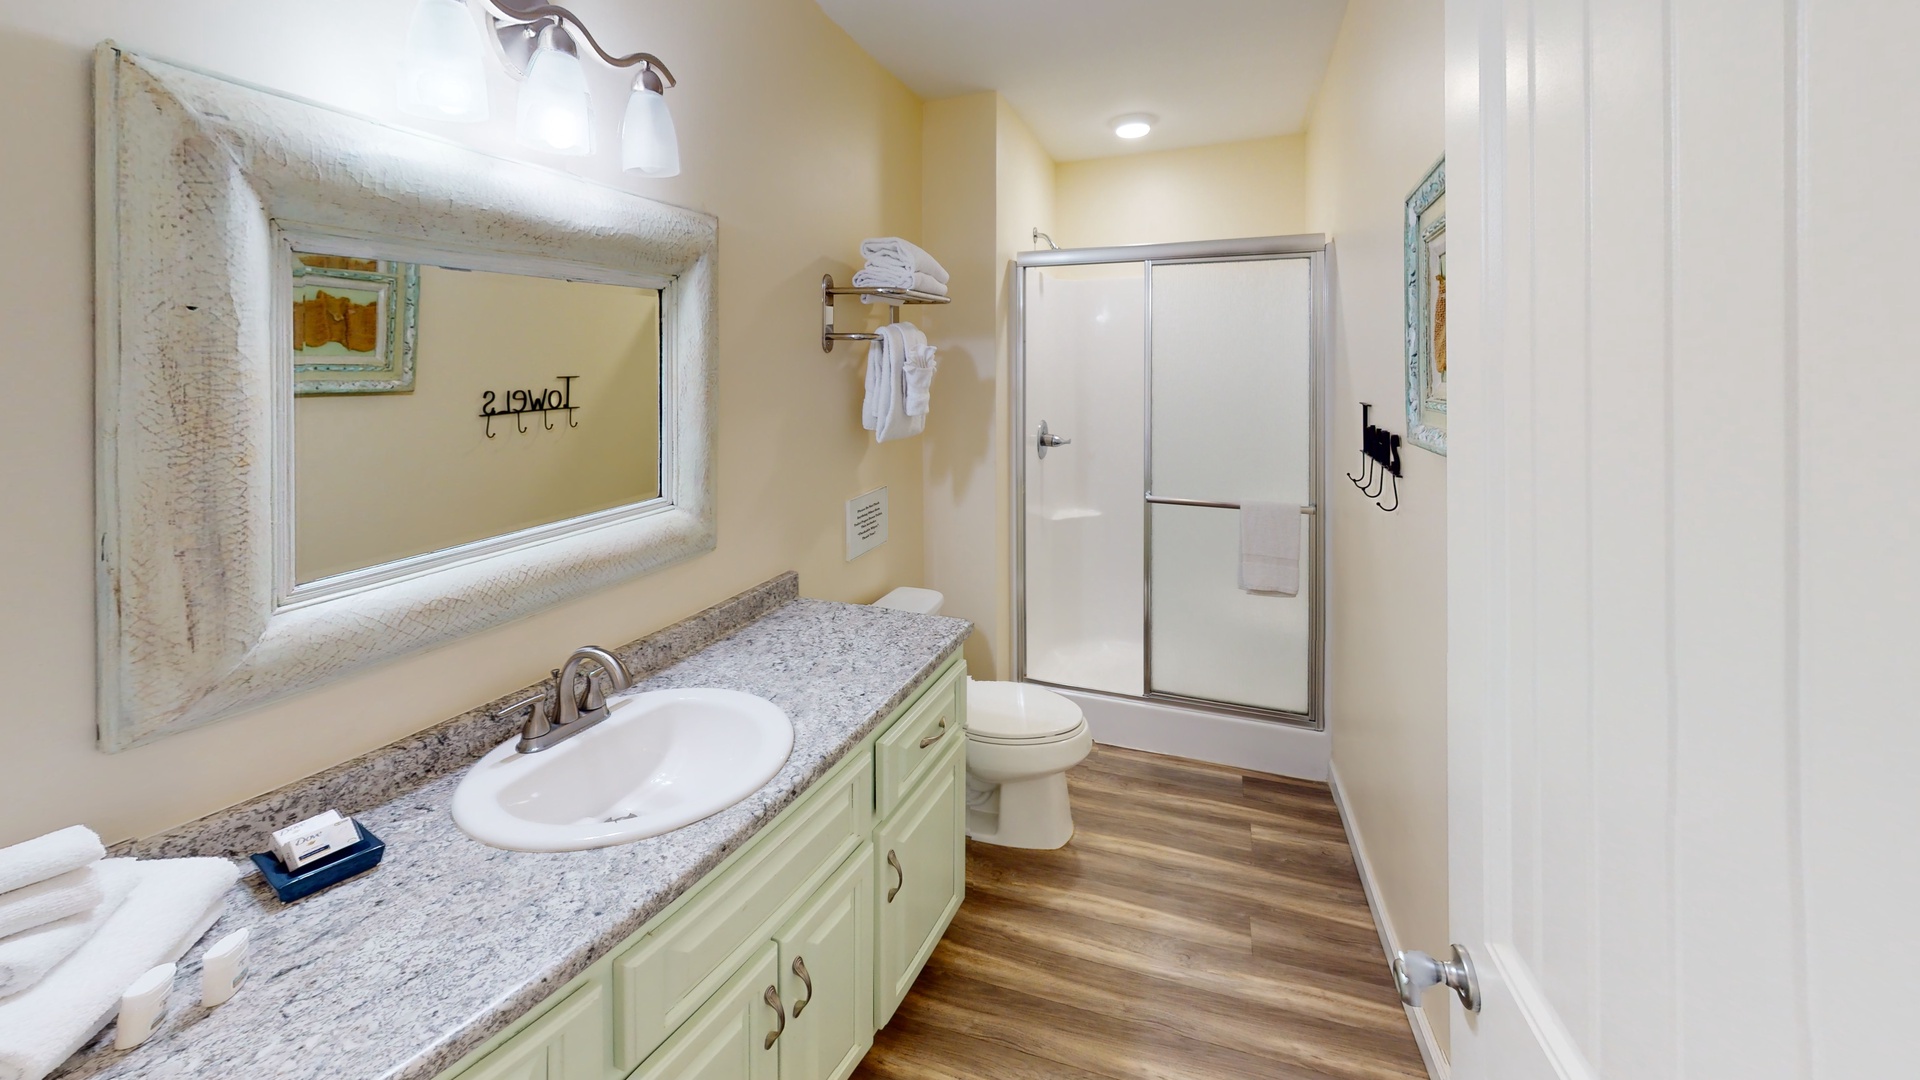 Shared hall bathroom with a walk-in shower